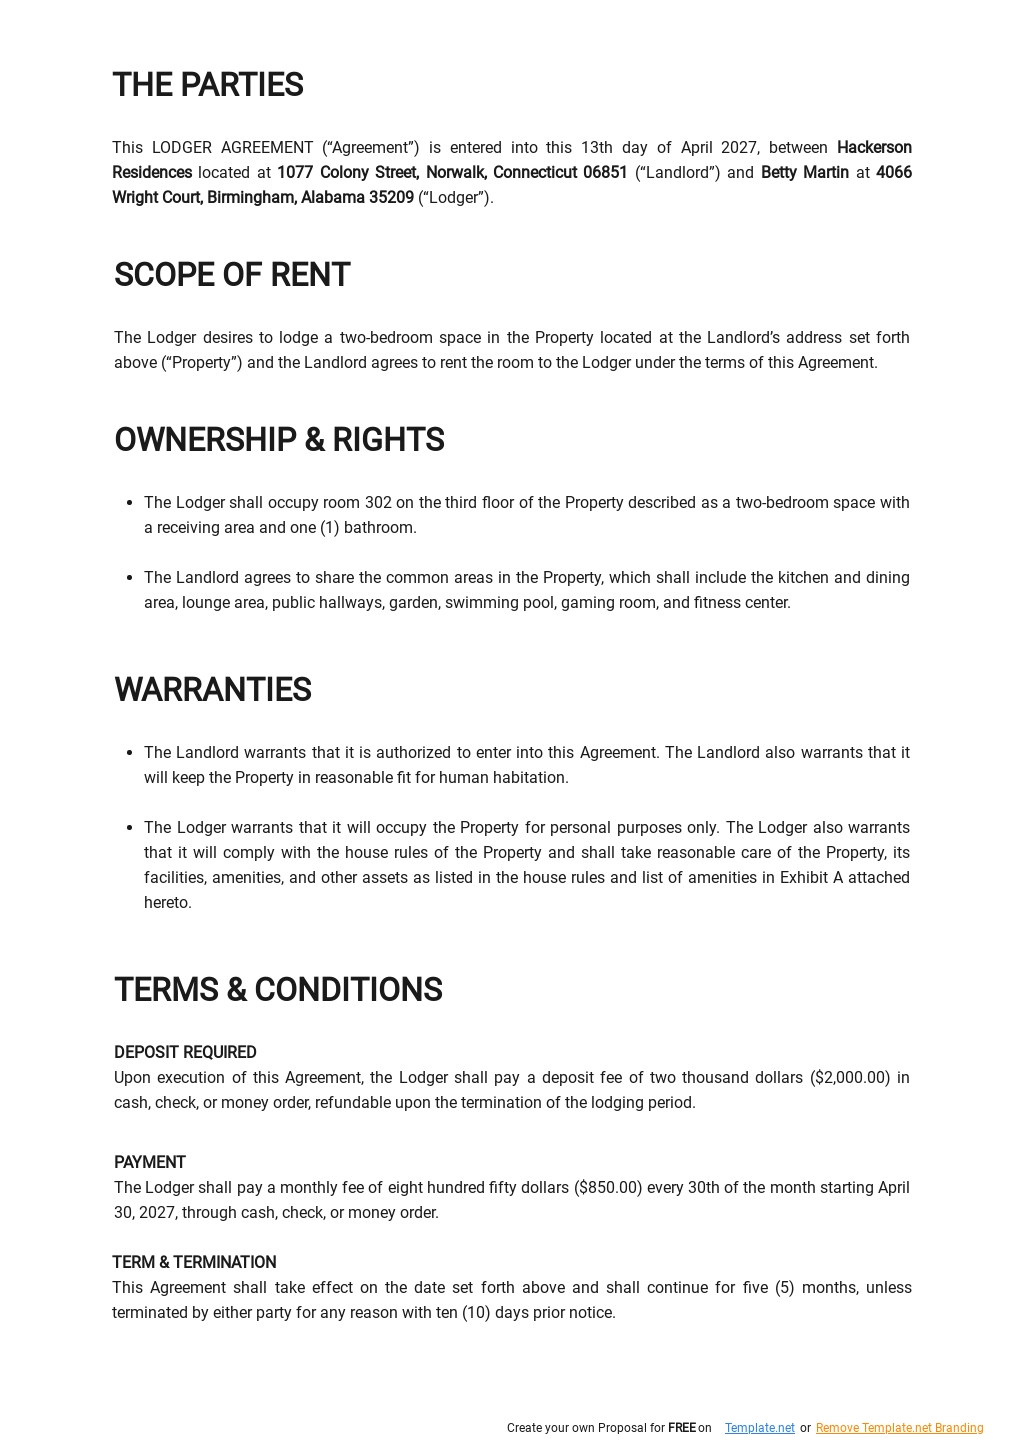 Free Basic Lodger Agreement Template - Google Docs, Word Pertaining To shelter lodger agreement template